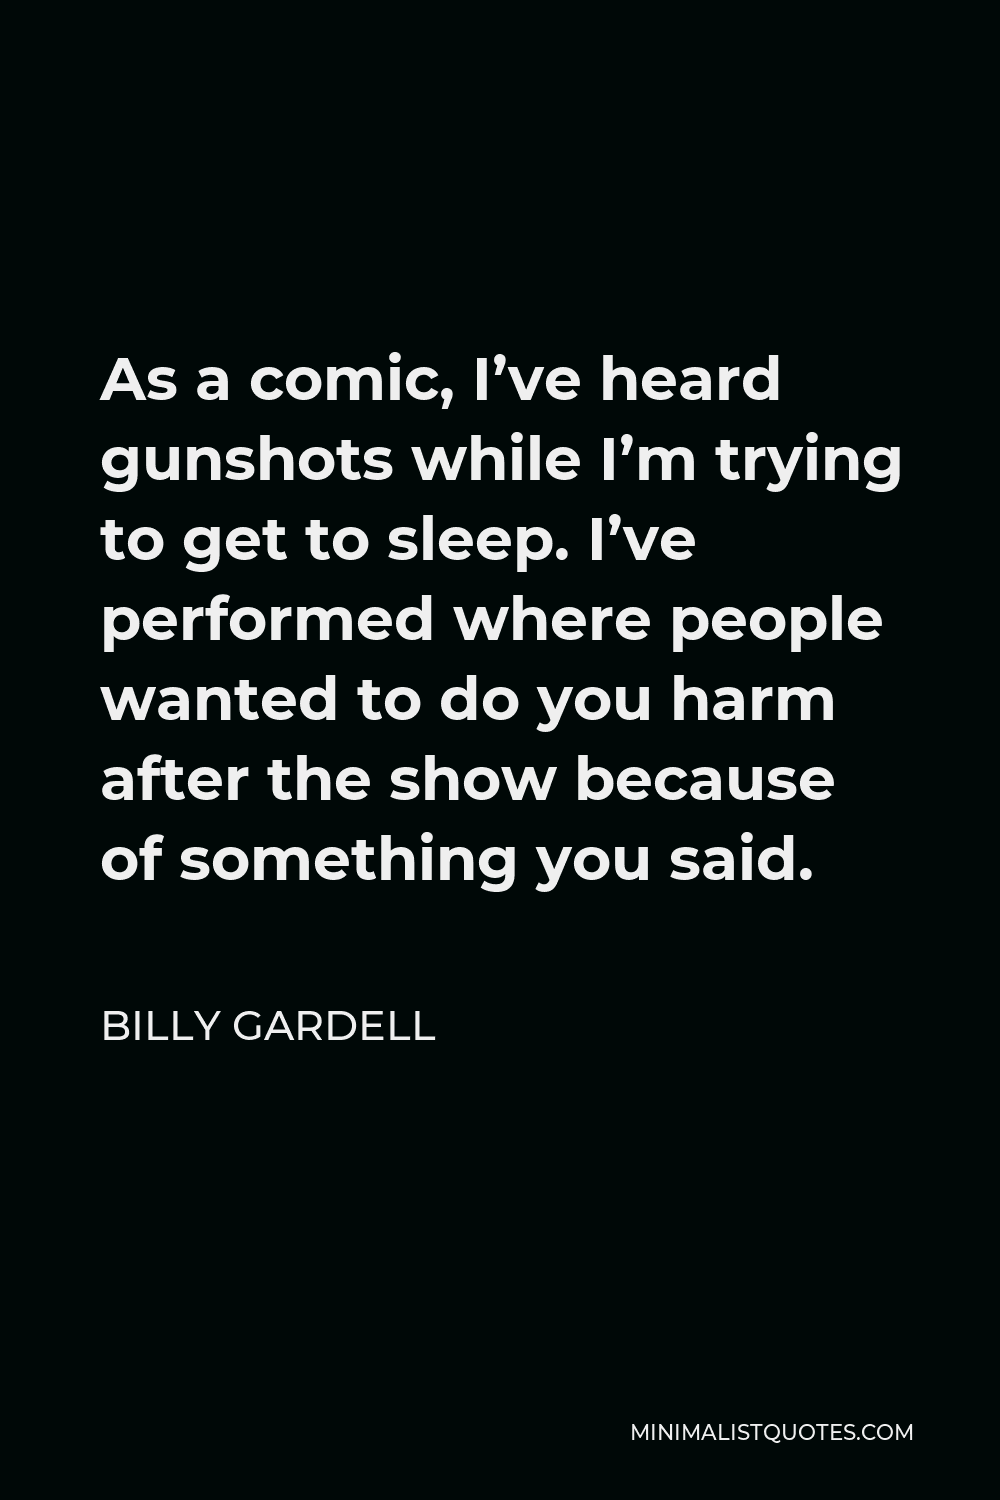 Billy Gardell Quote - As a comic, I’ve heard gunshots while I’m trying to get to sleep. I’ve performed where people wanted to do you harm after the show because of something you said.